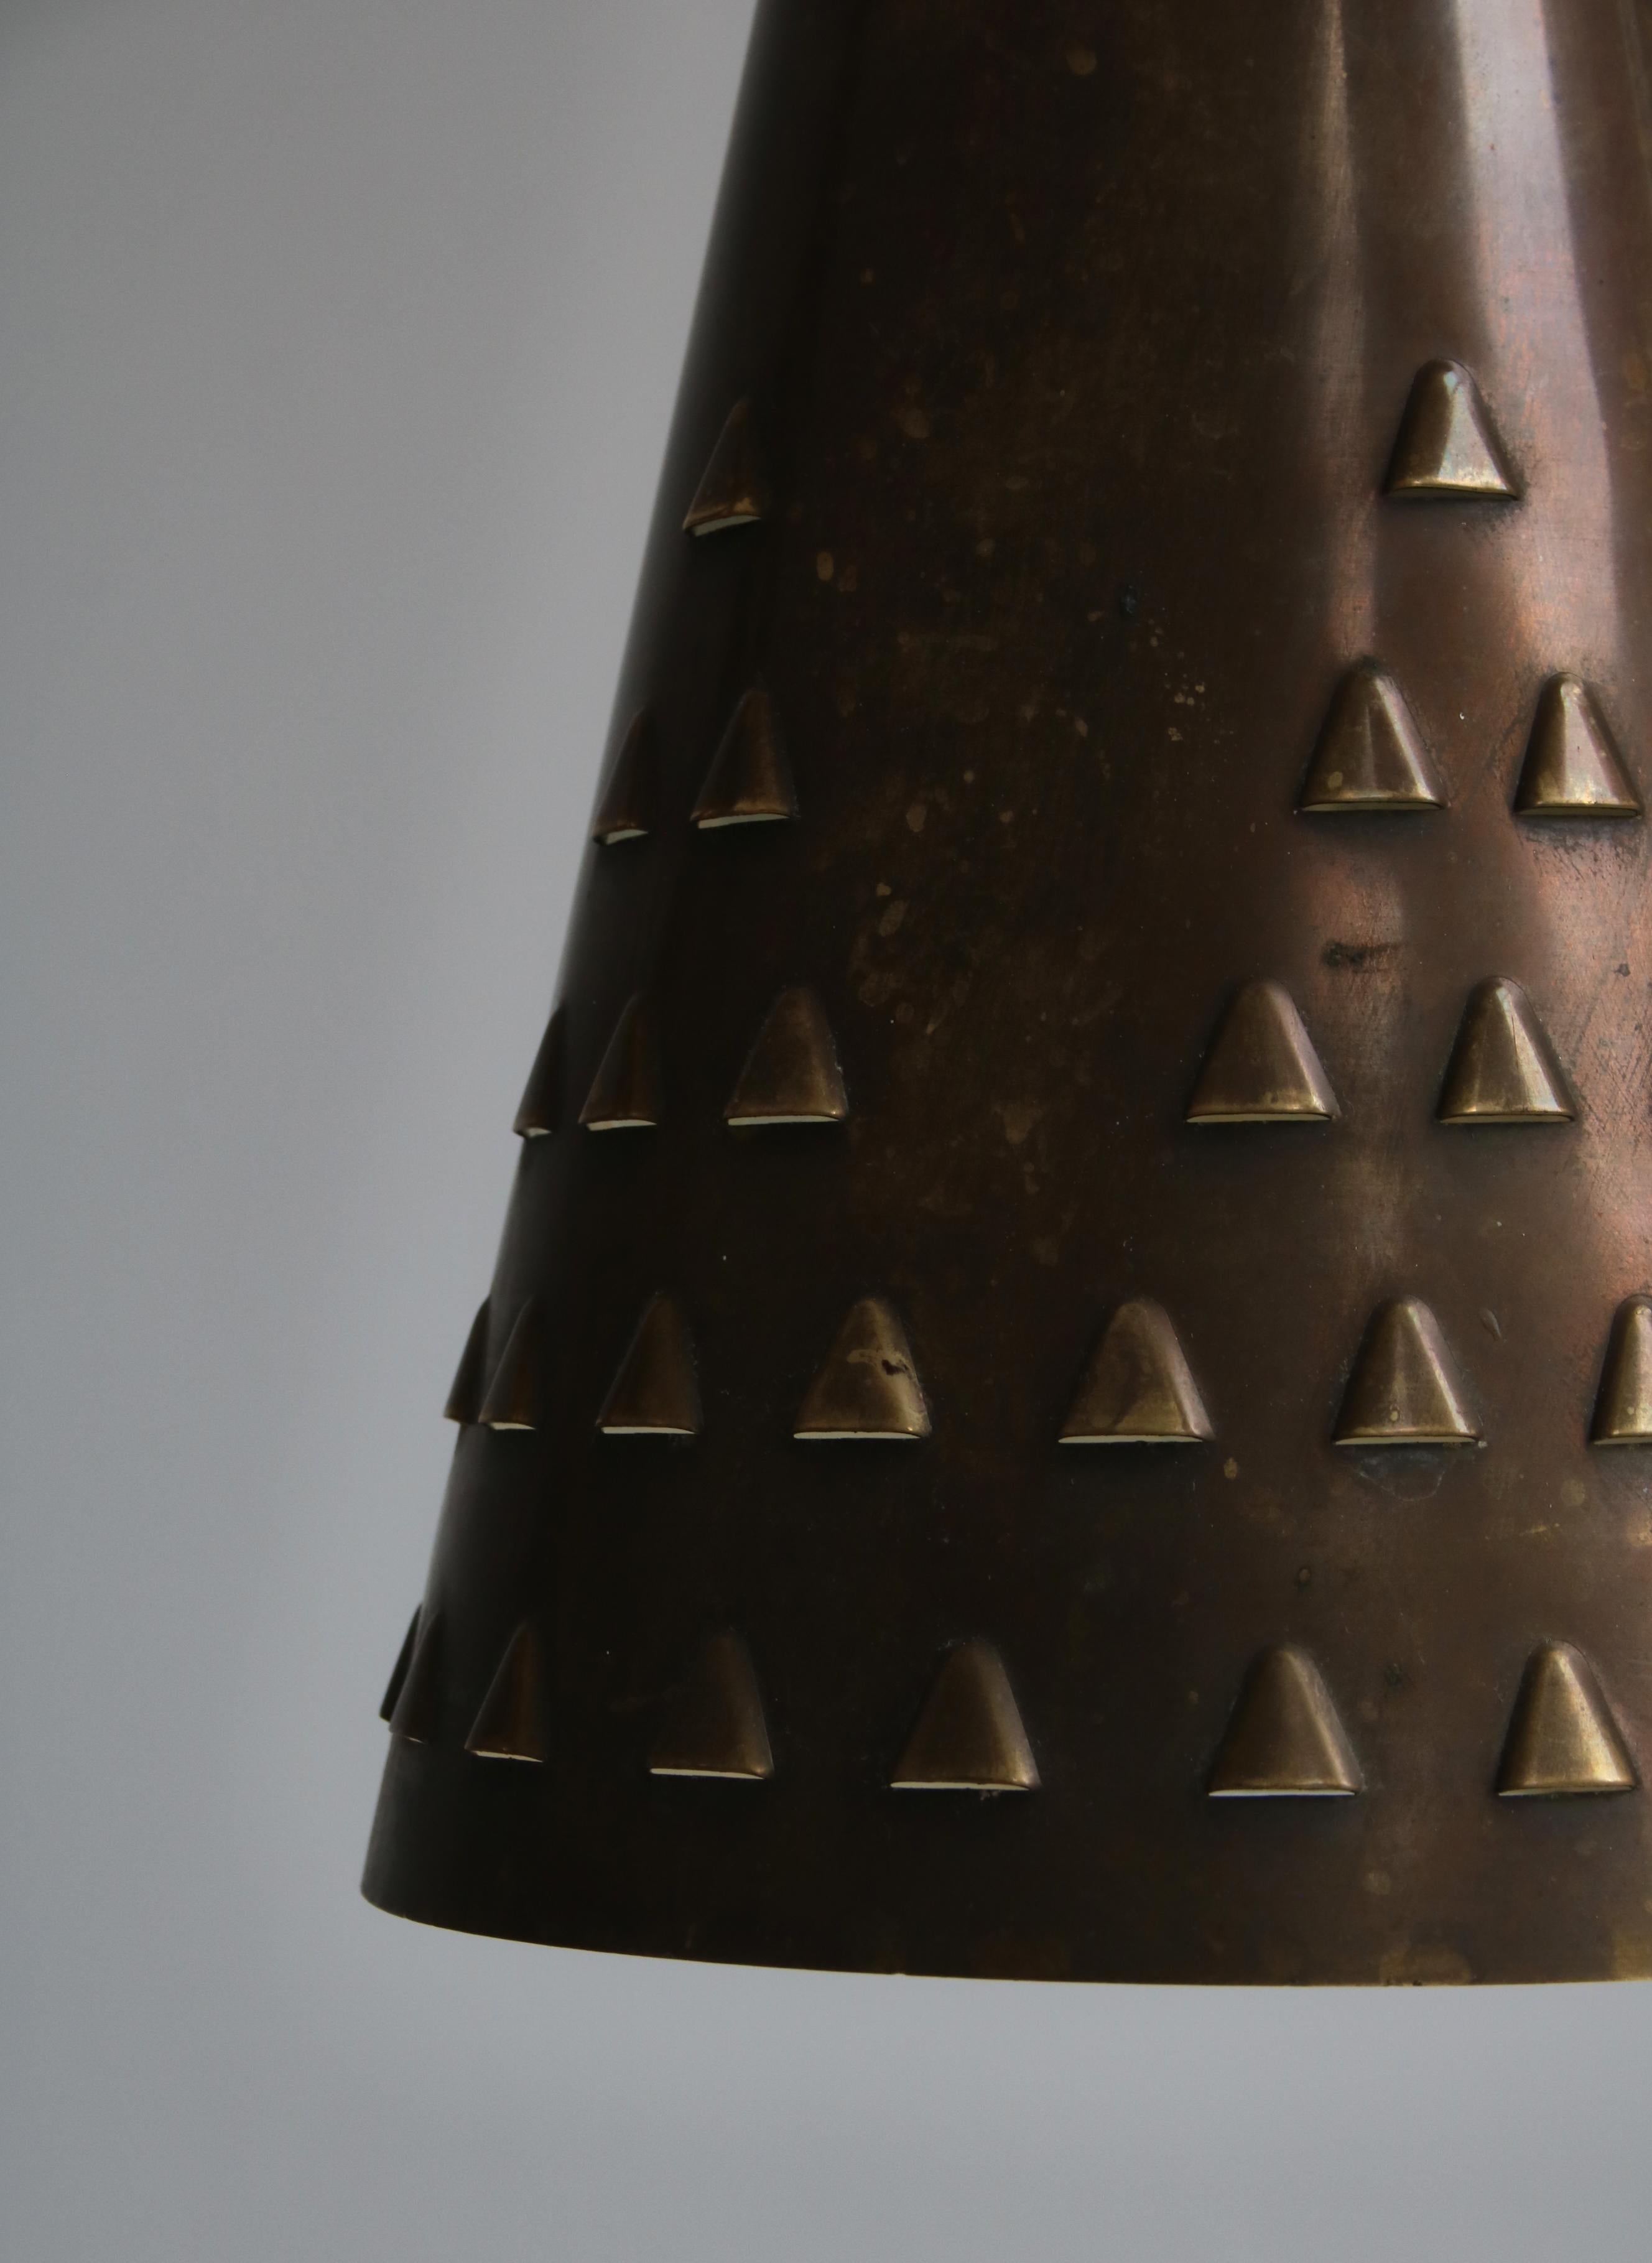 Large Pendants in Patinated Brass by Brockmann-Petersen, Danish Modern, 1953 In Good Condition For Sale In Odense, DK